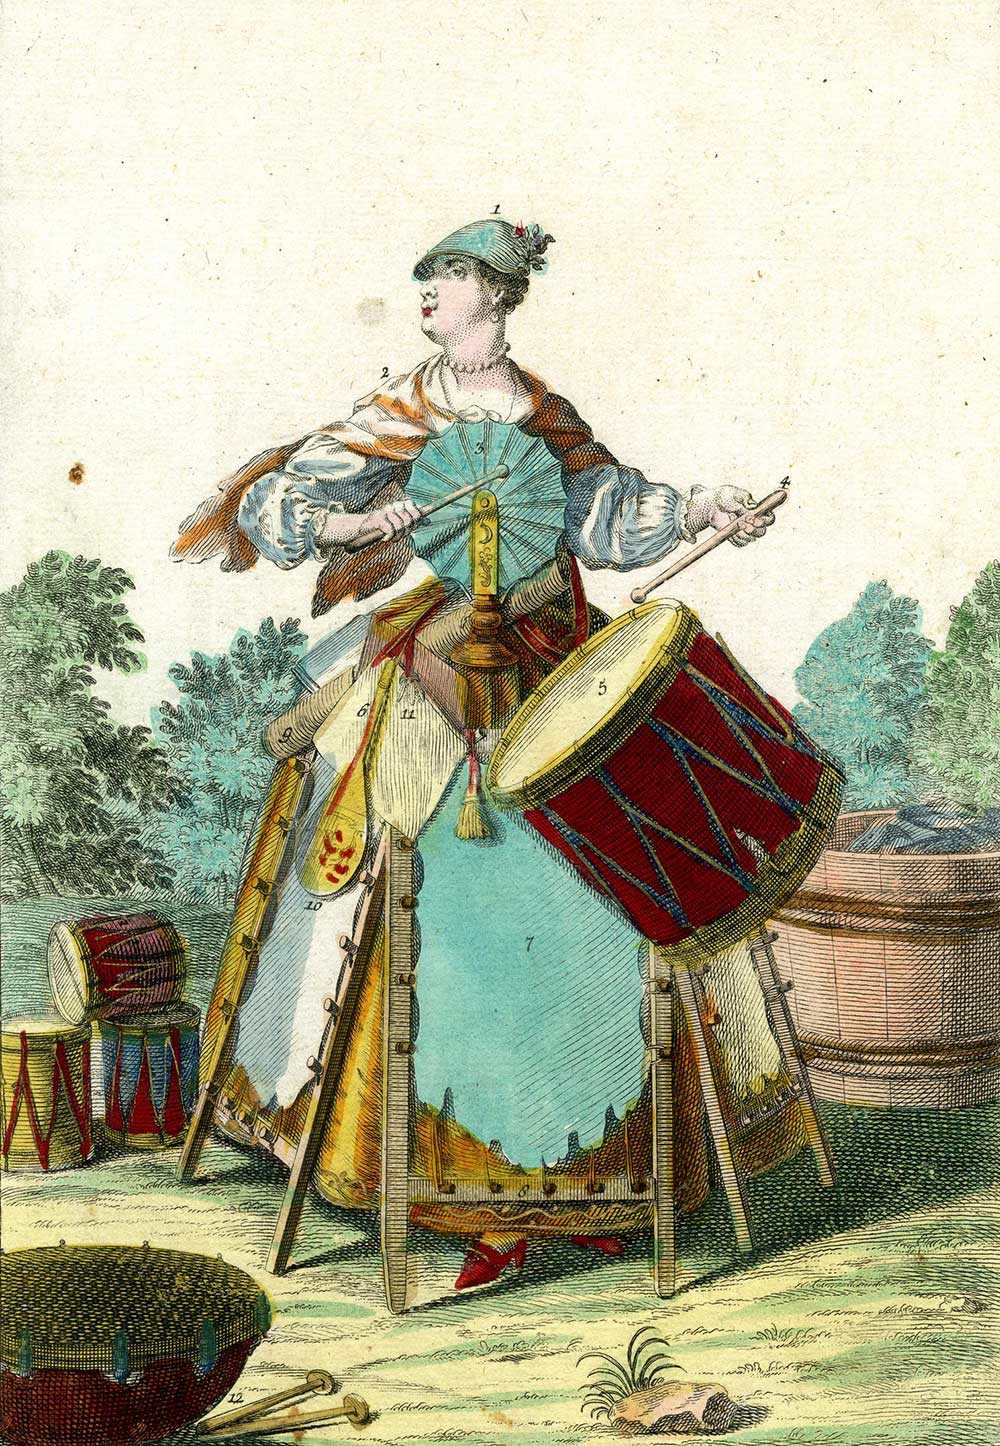 Female parchment maker dressed in fans and frames with stretched skins, striking a large parchment covered drum. c. 1730.